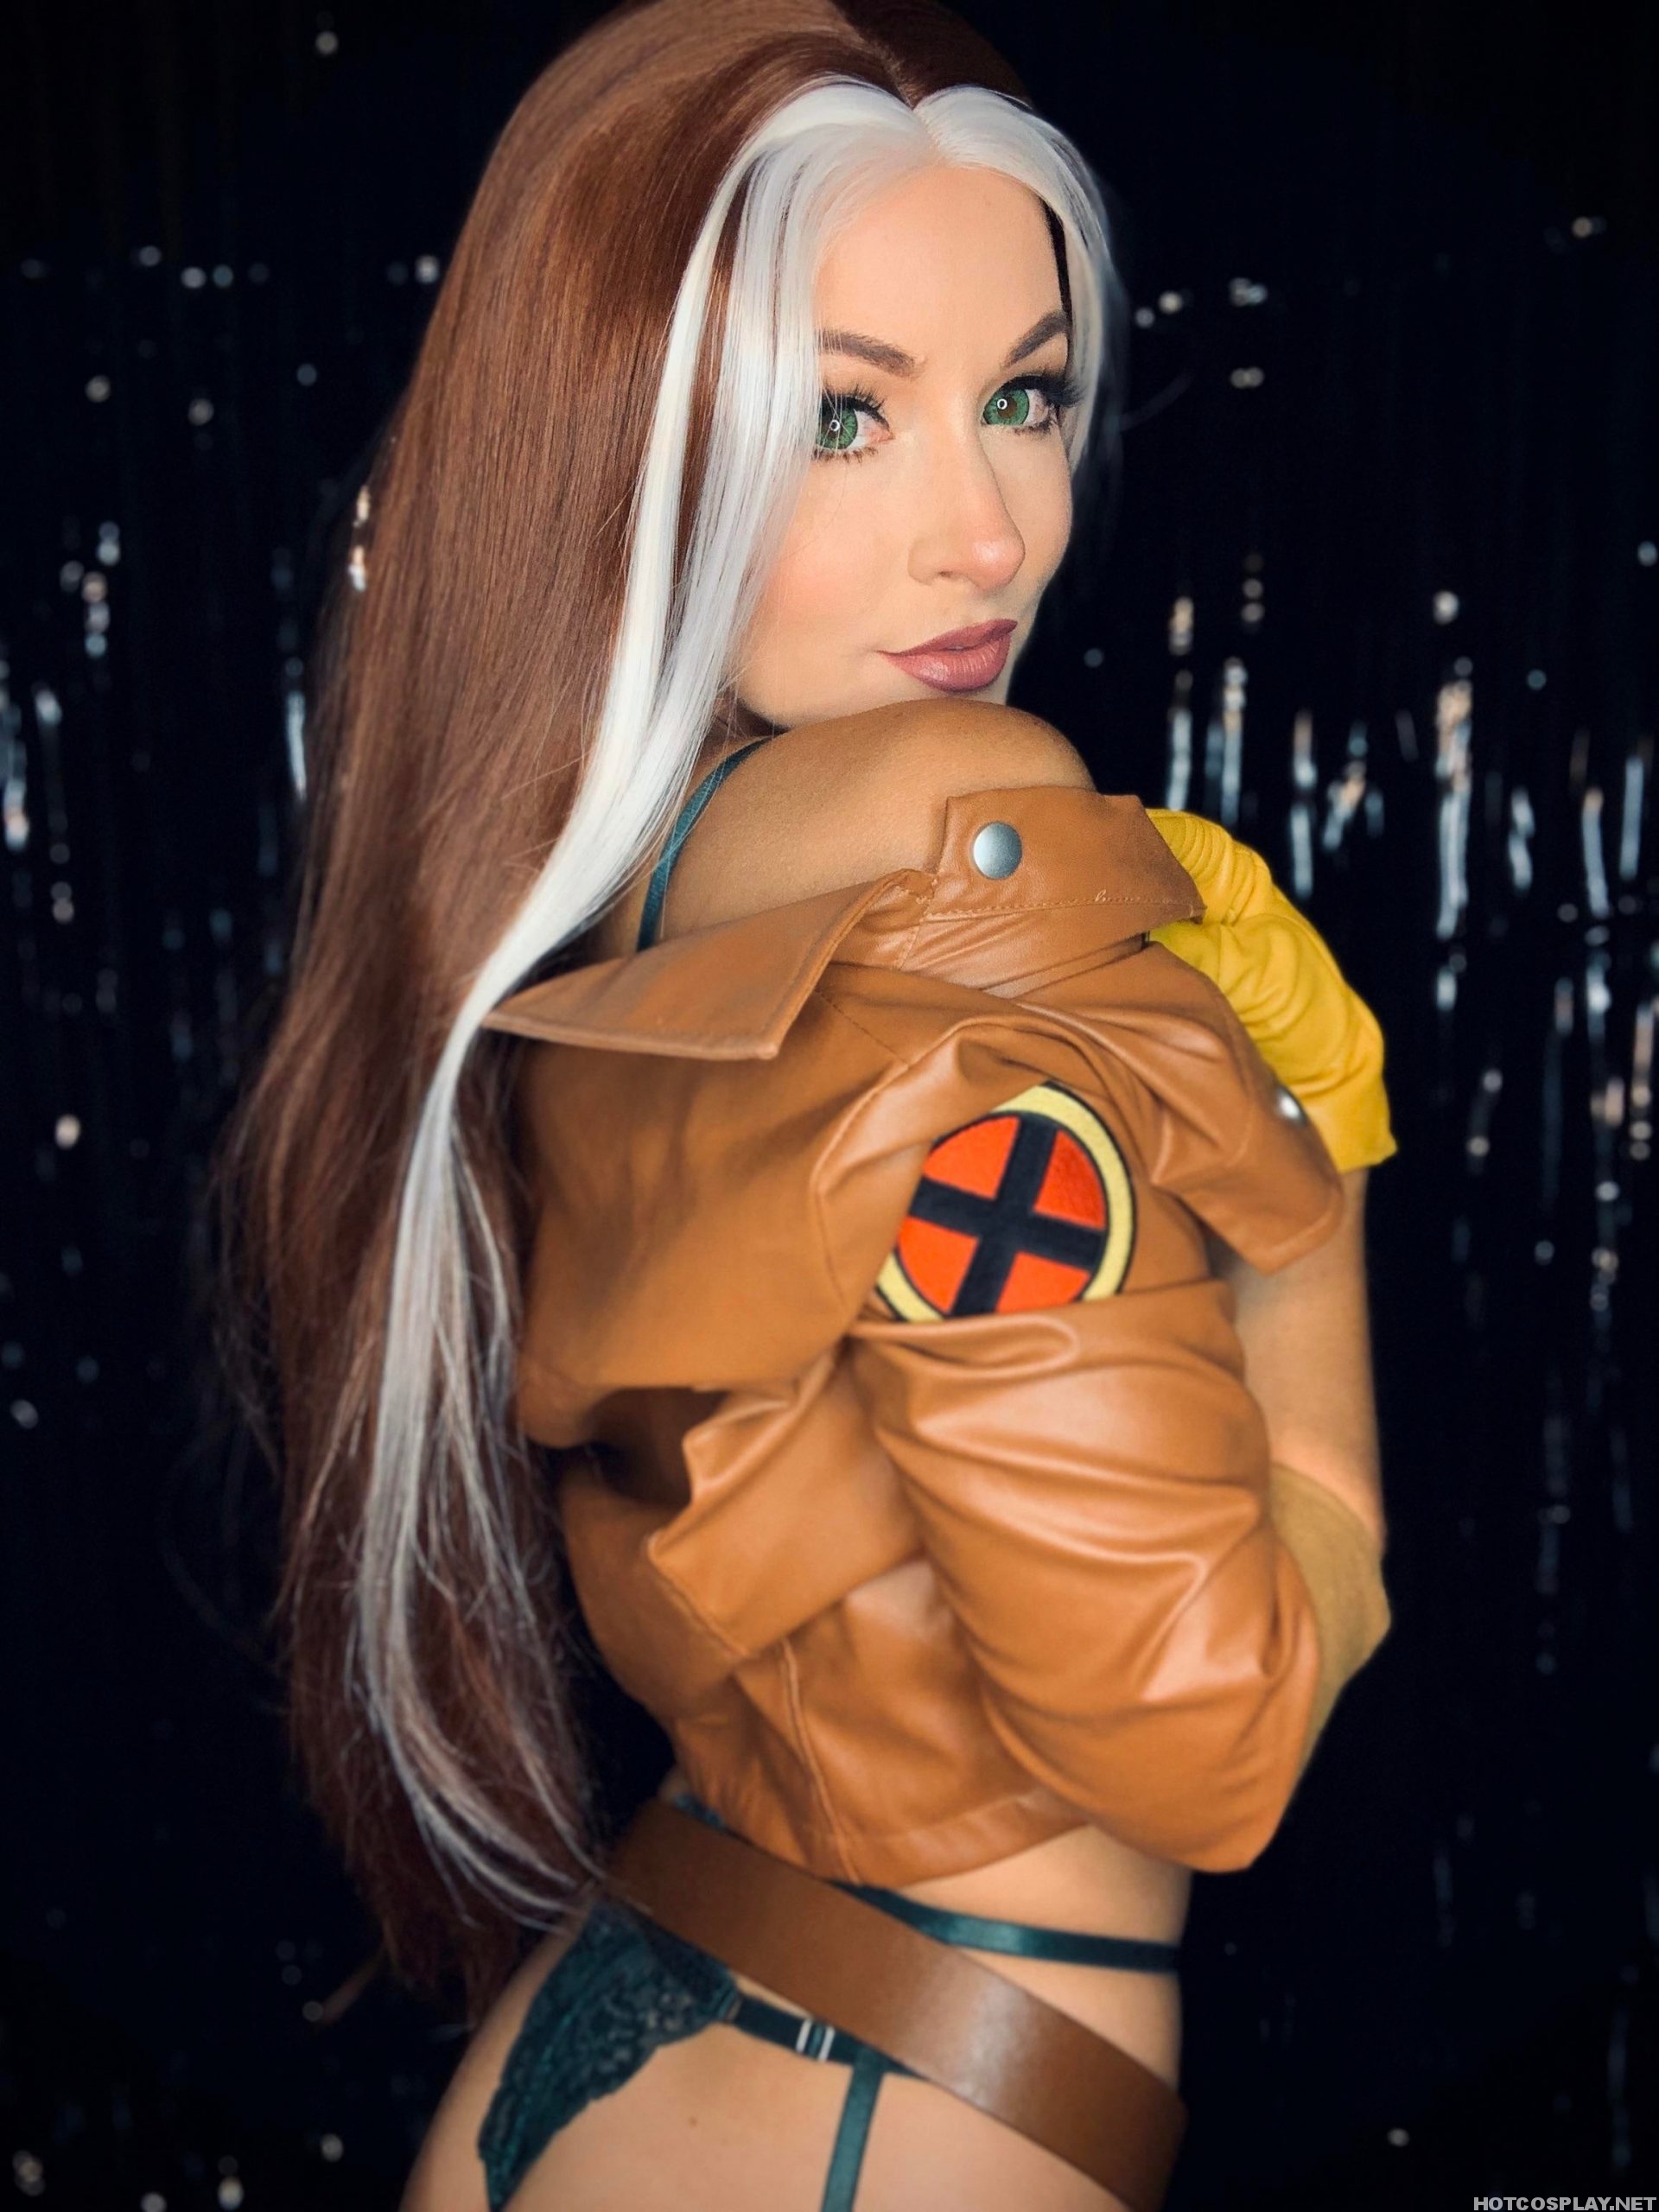 Rogue From X Men Cosplay Porn - X-Men Fans Will Love This Lewd and Nude Rogue Cosplay Collection